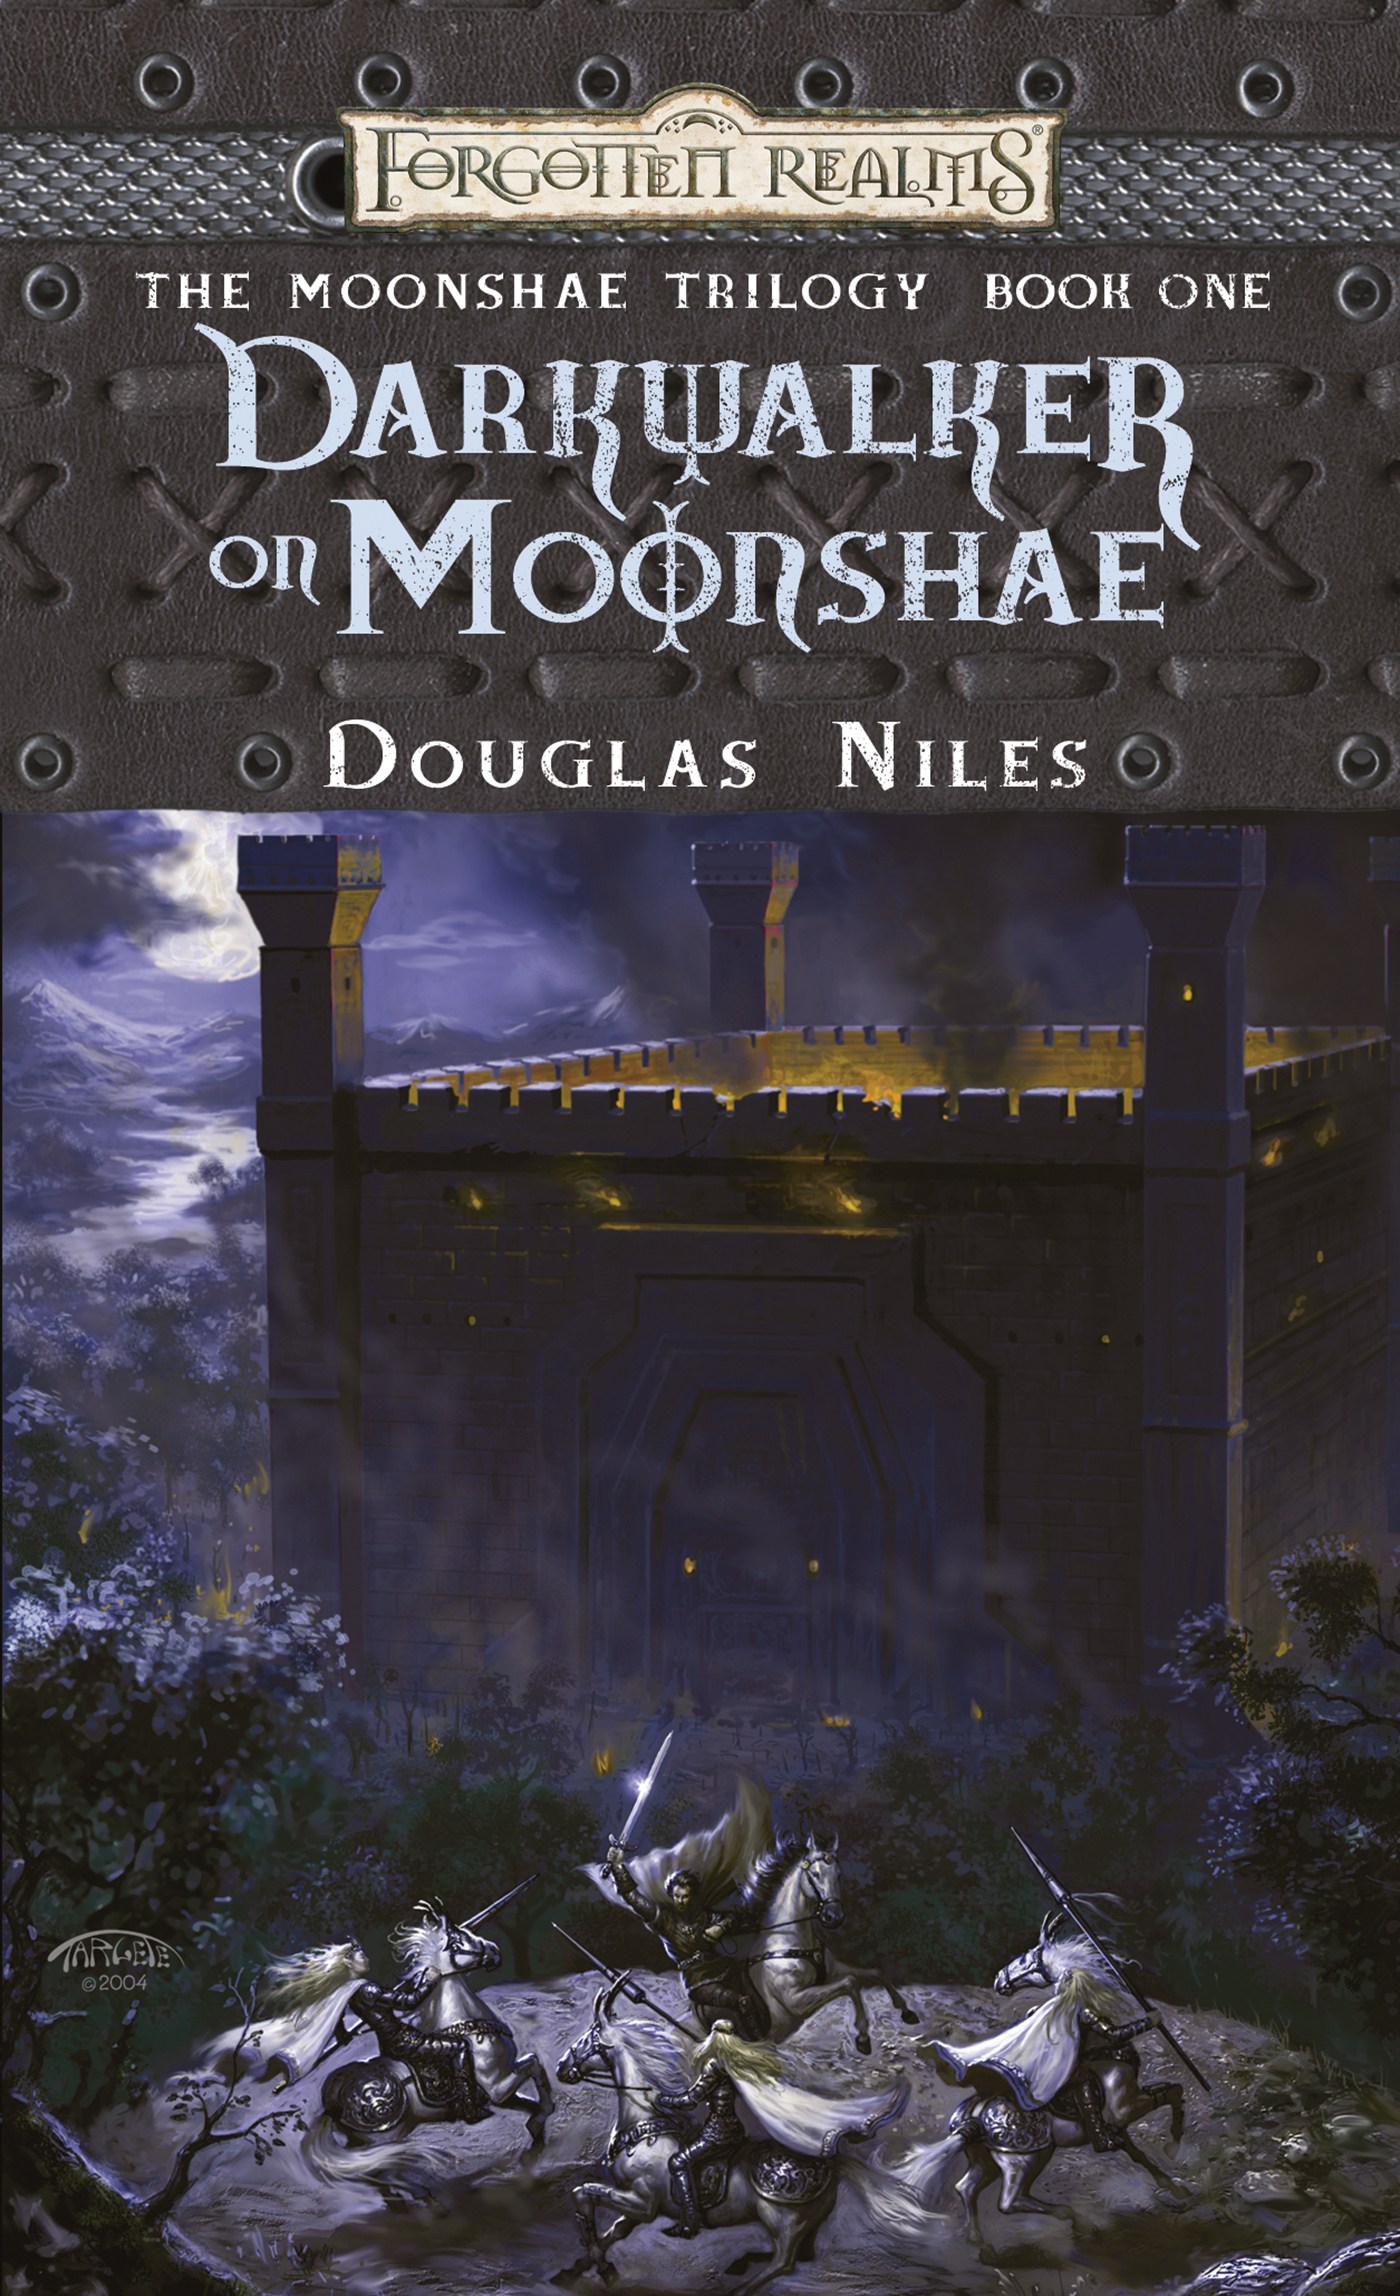 Reprint cover by J.P. Targate. (Image: Wizards of the Coast)